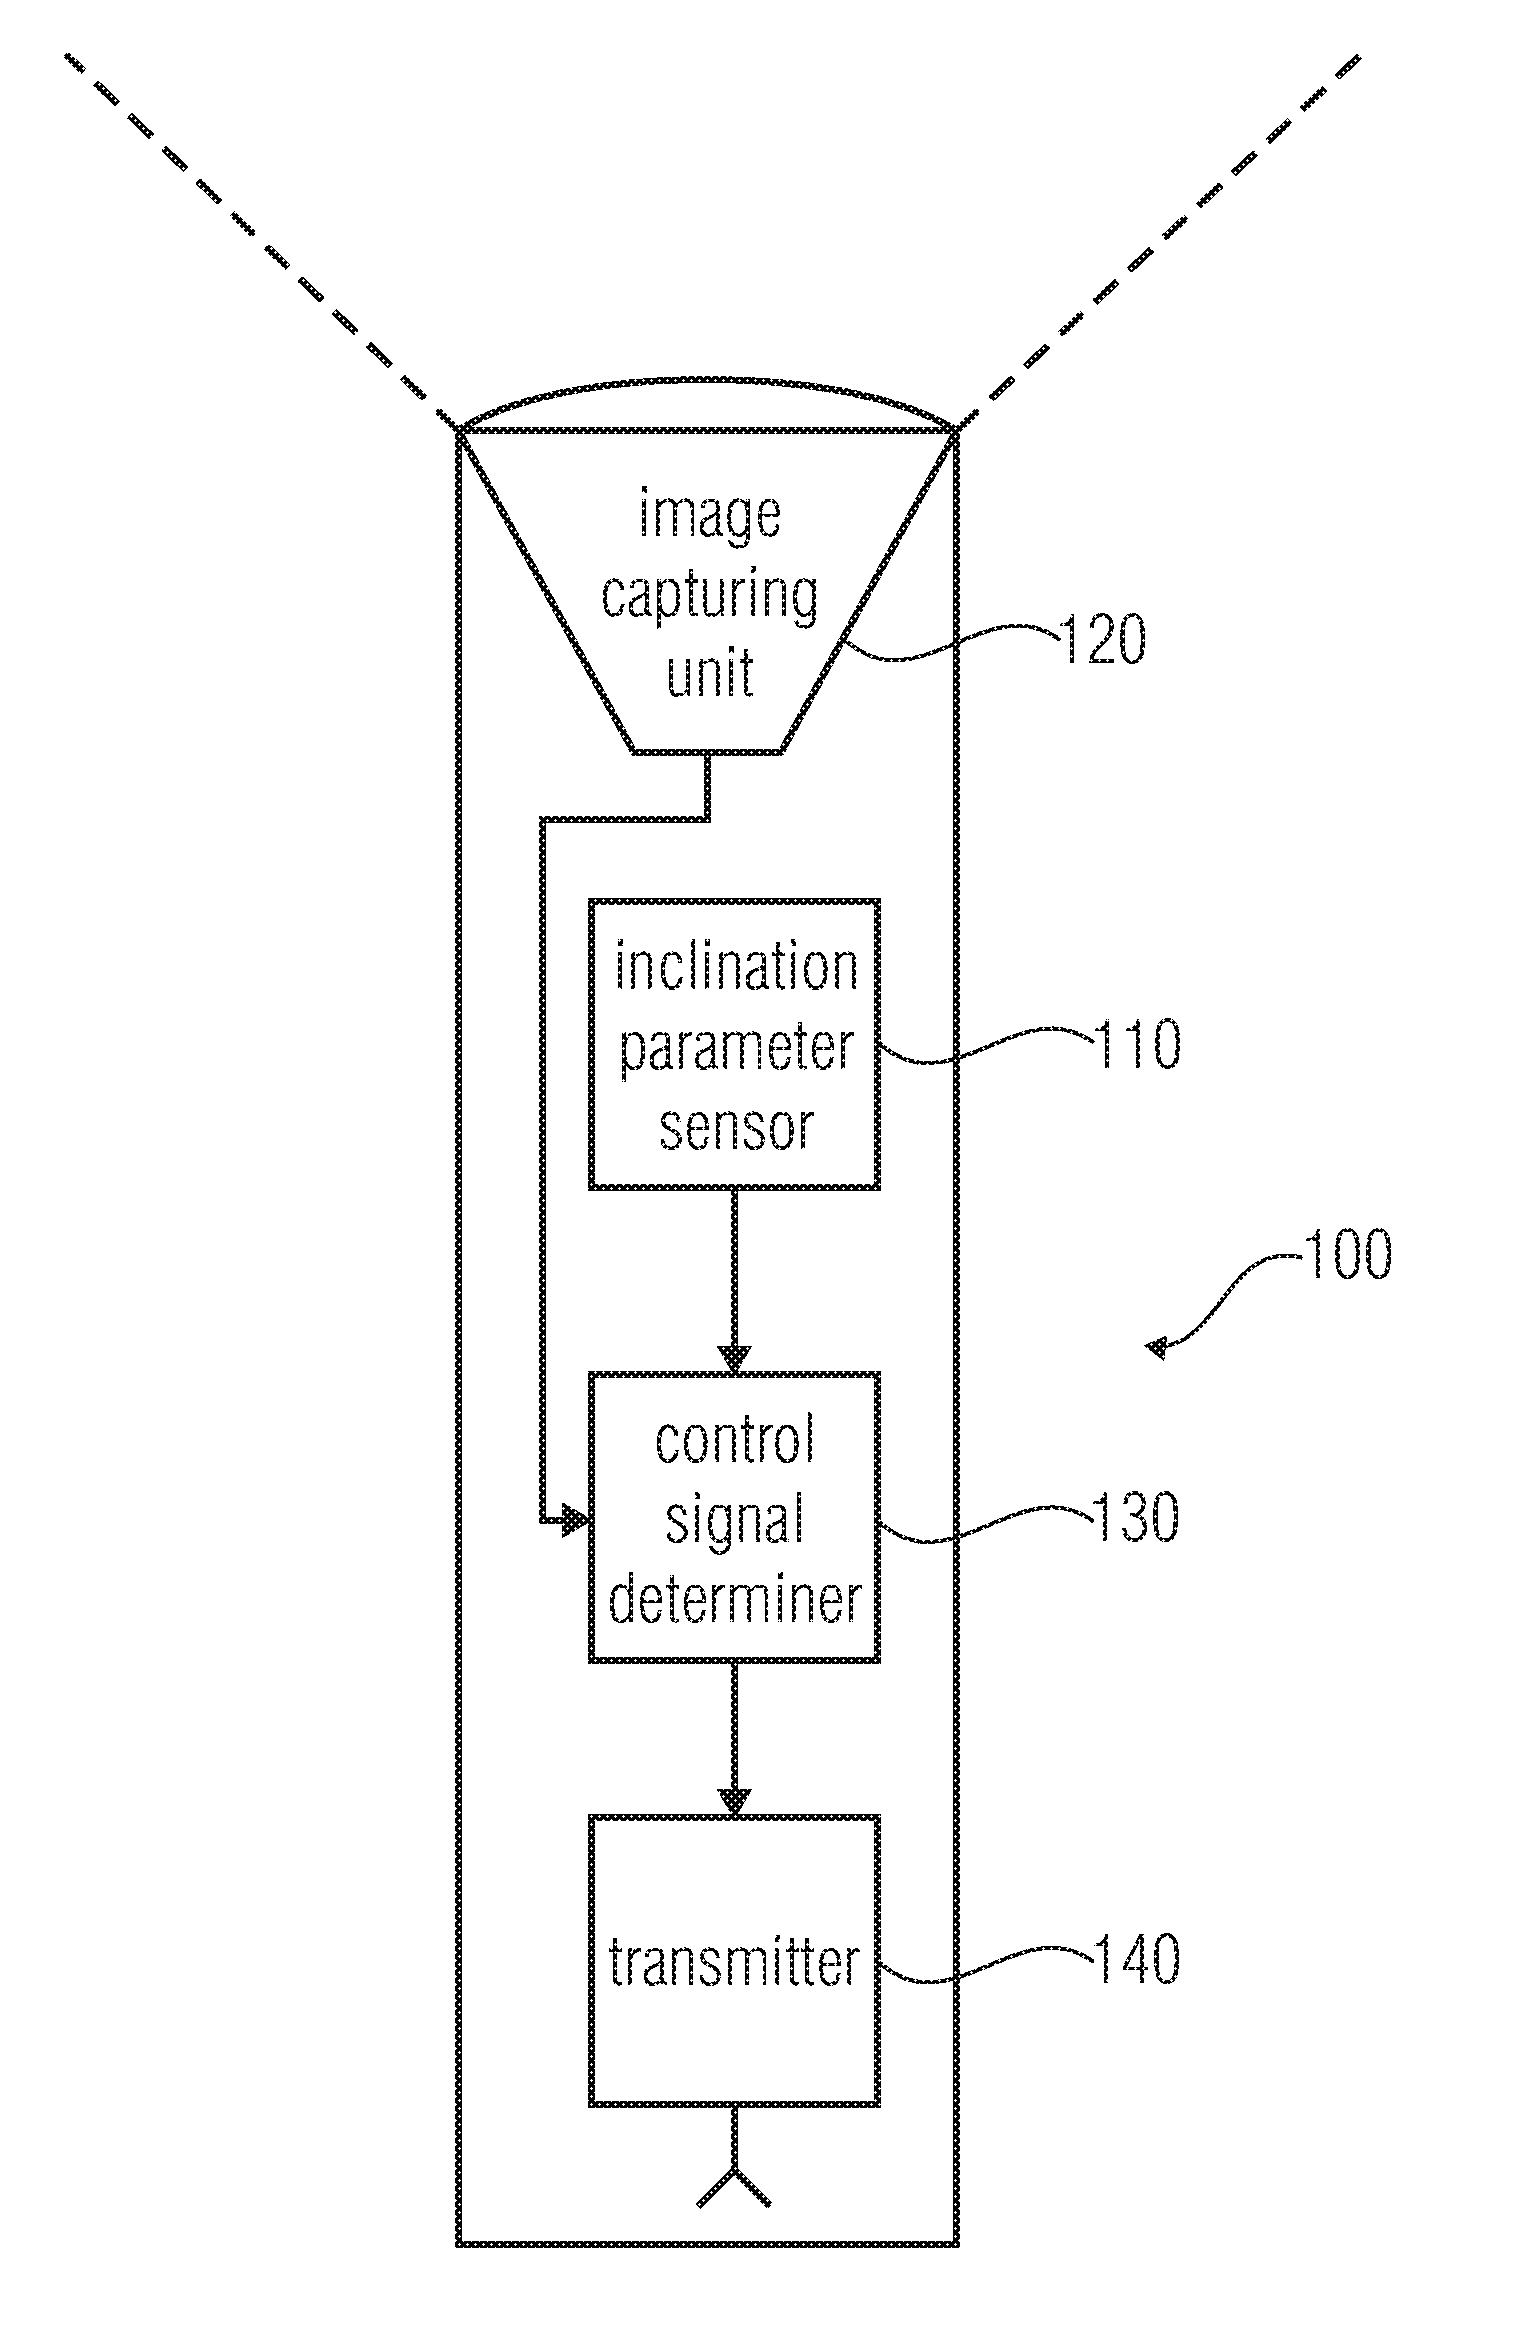 Hand-held pointing device, software cursor control system and method for controlling a movement of a software cursor